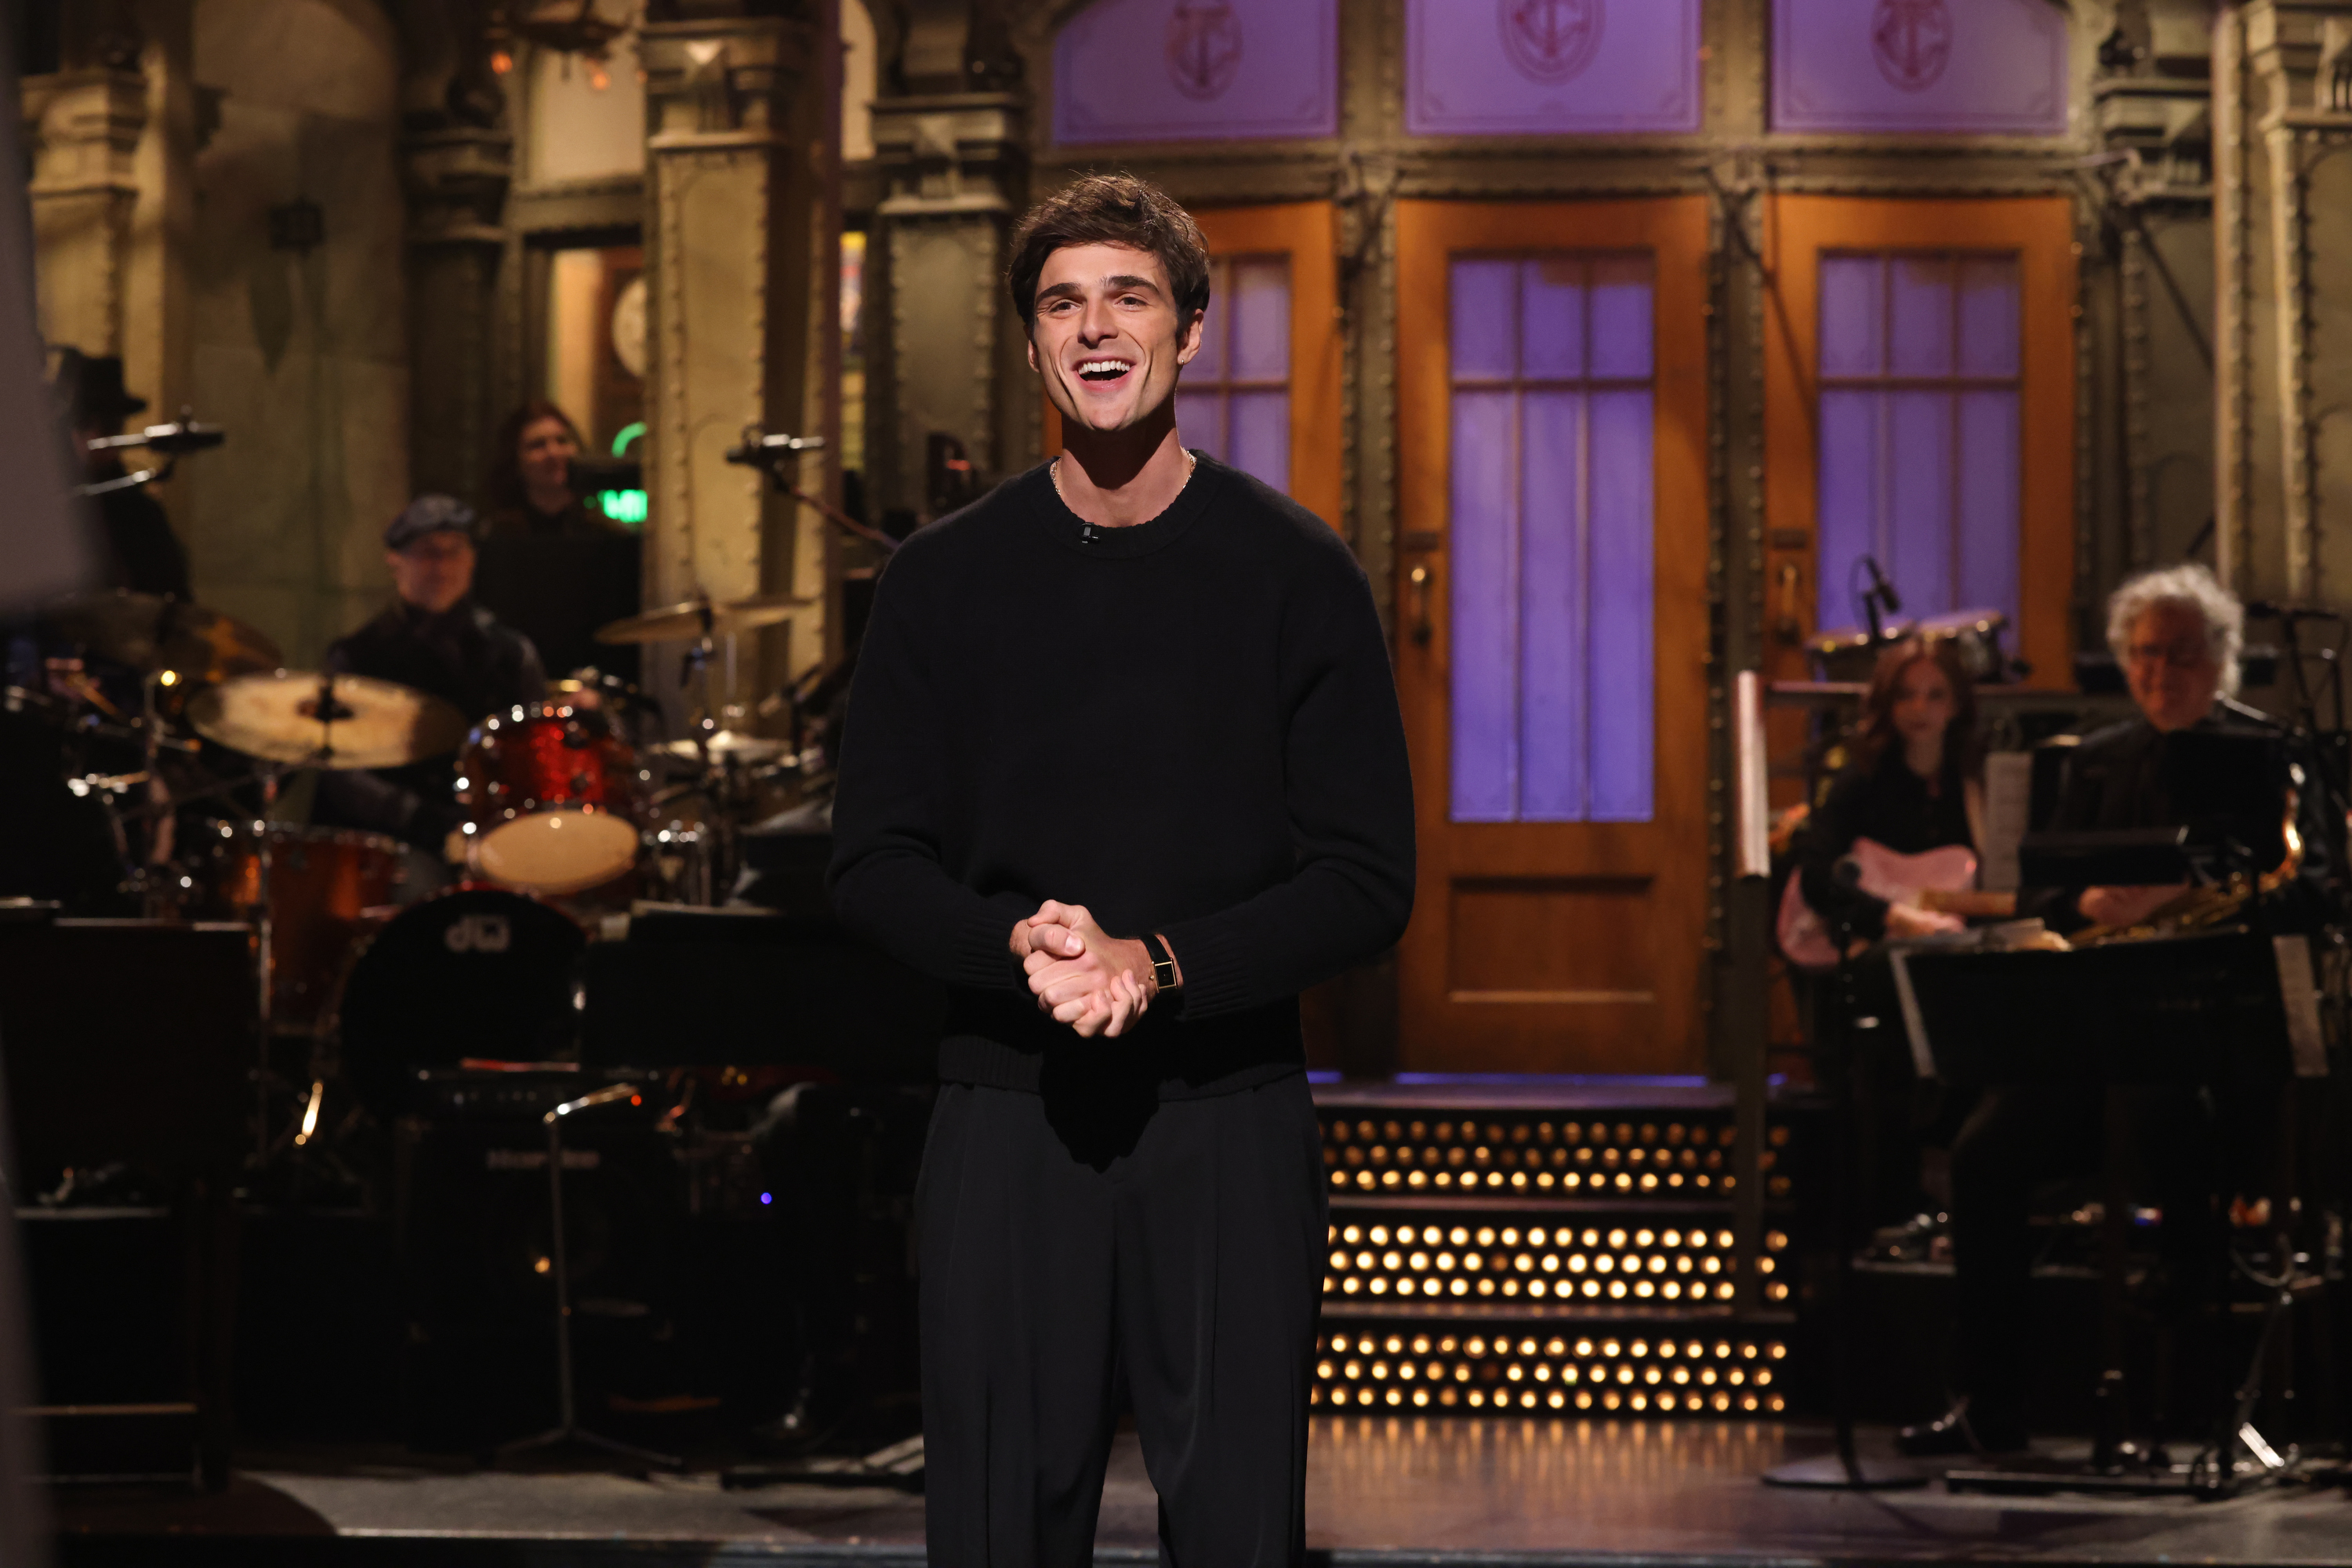 Jacob onstage at SNL with a microphone stand, smiling, wearing a sweater, with the SNL band in the background